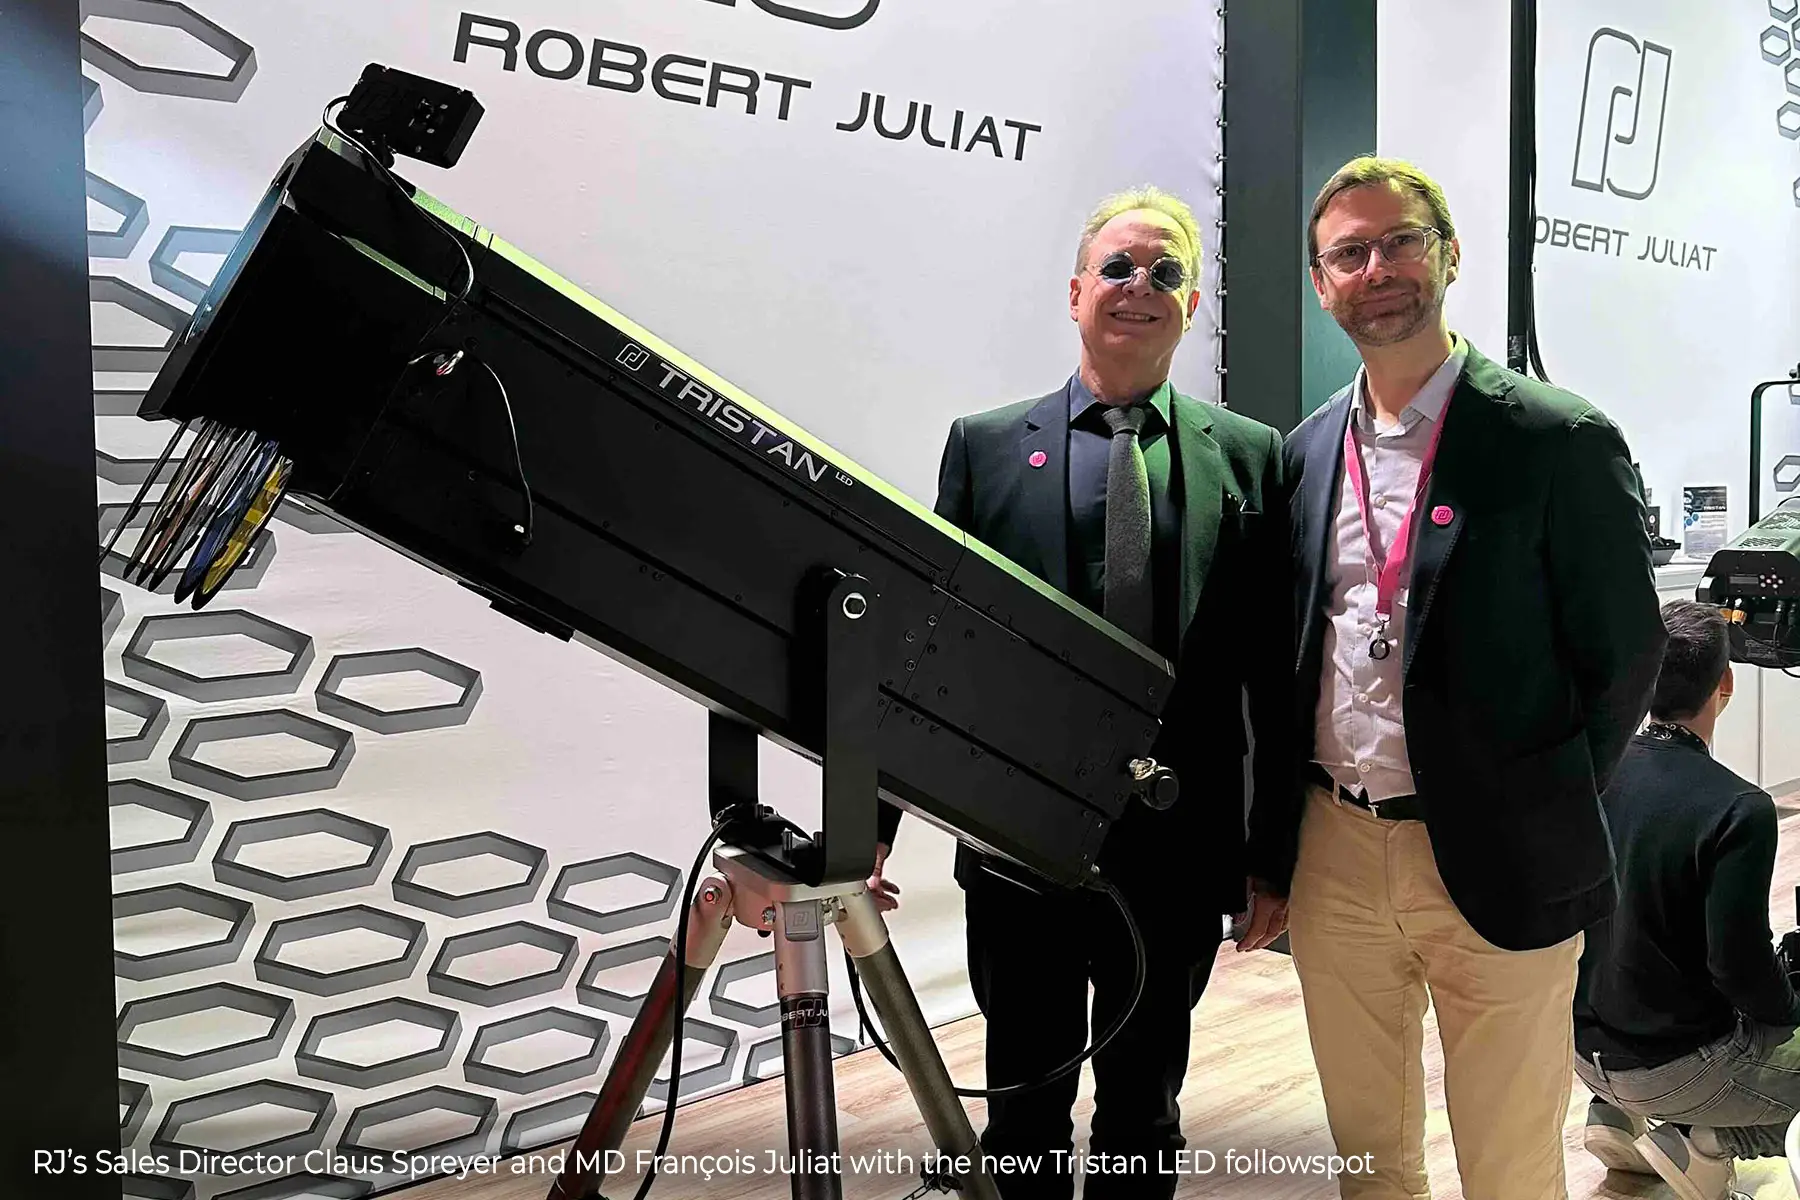 RJ’s Sales Director Claus Spreyer and MD François Juliat with the new Tristan LED followspot